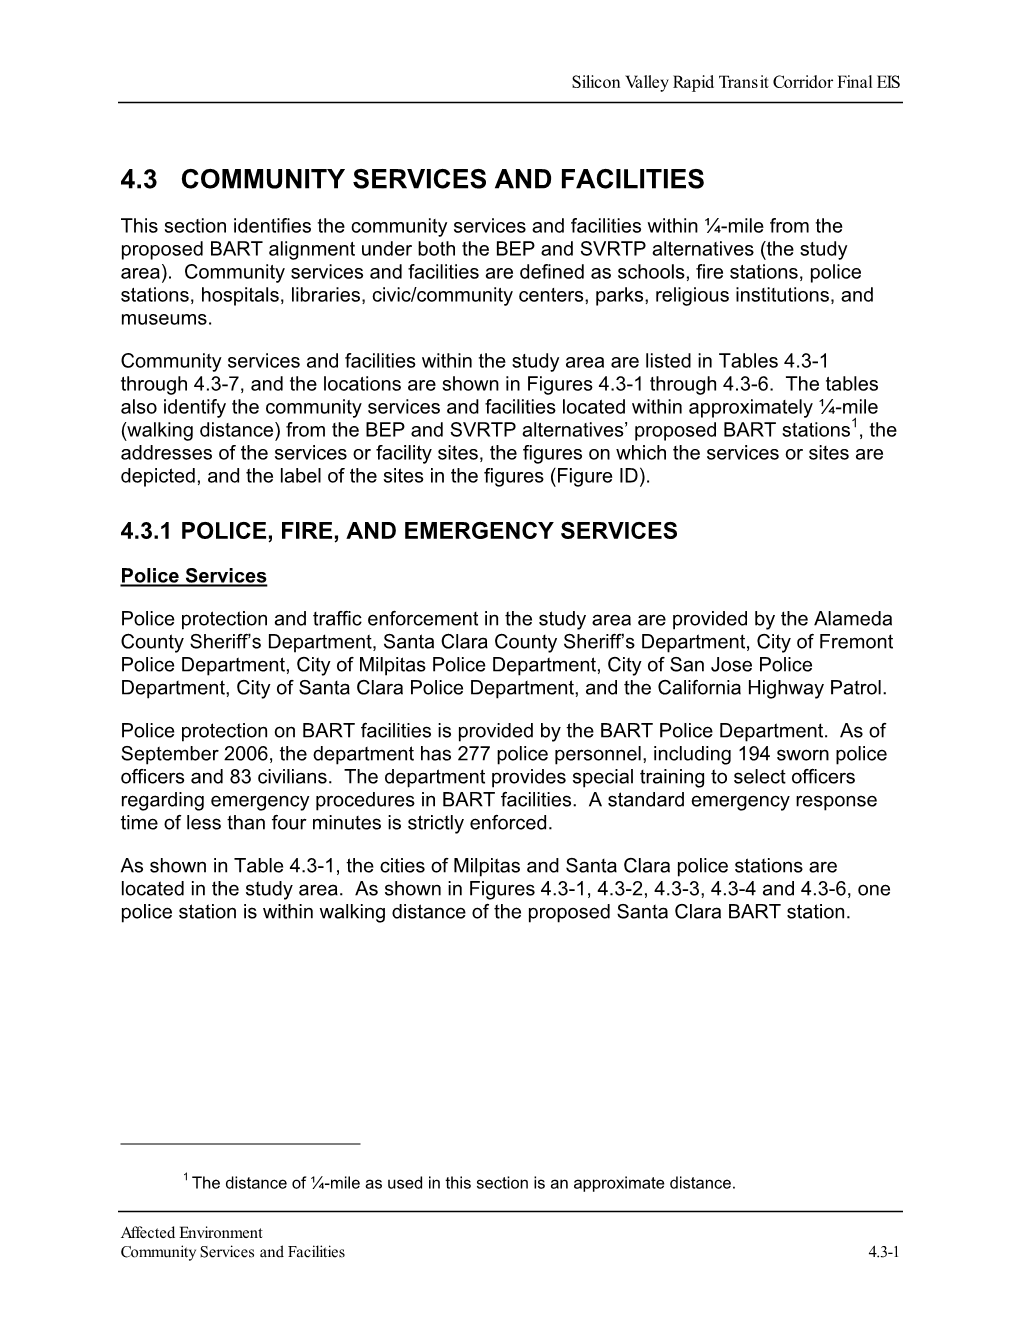 4.3 Community Services and Facilities